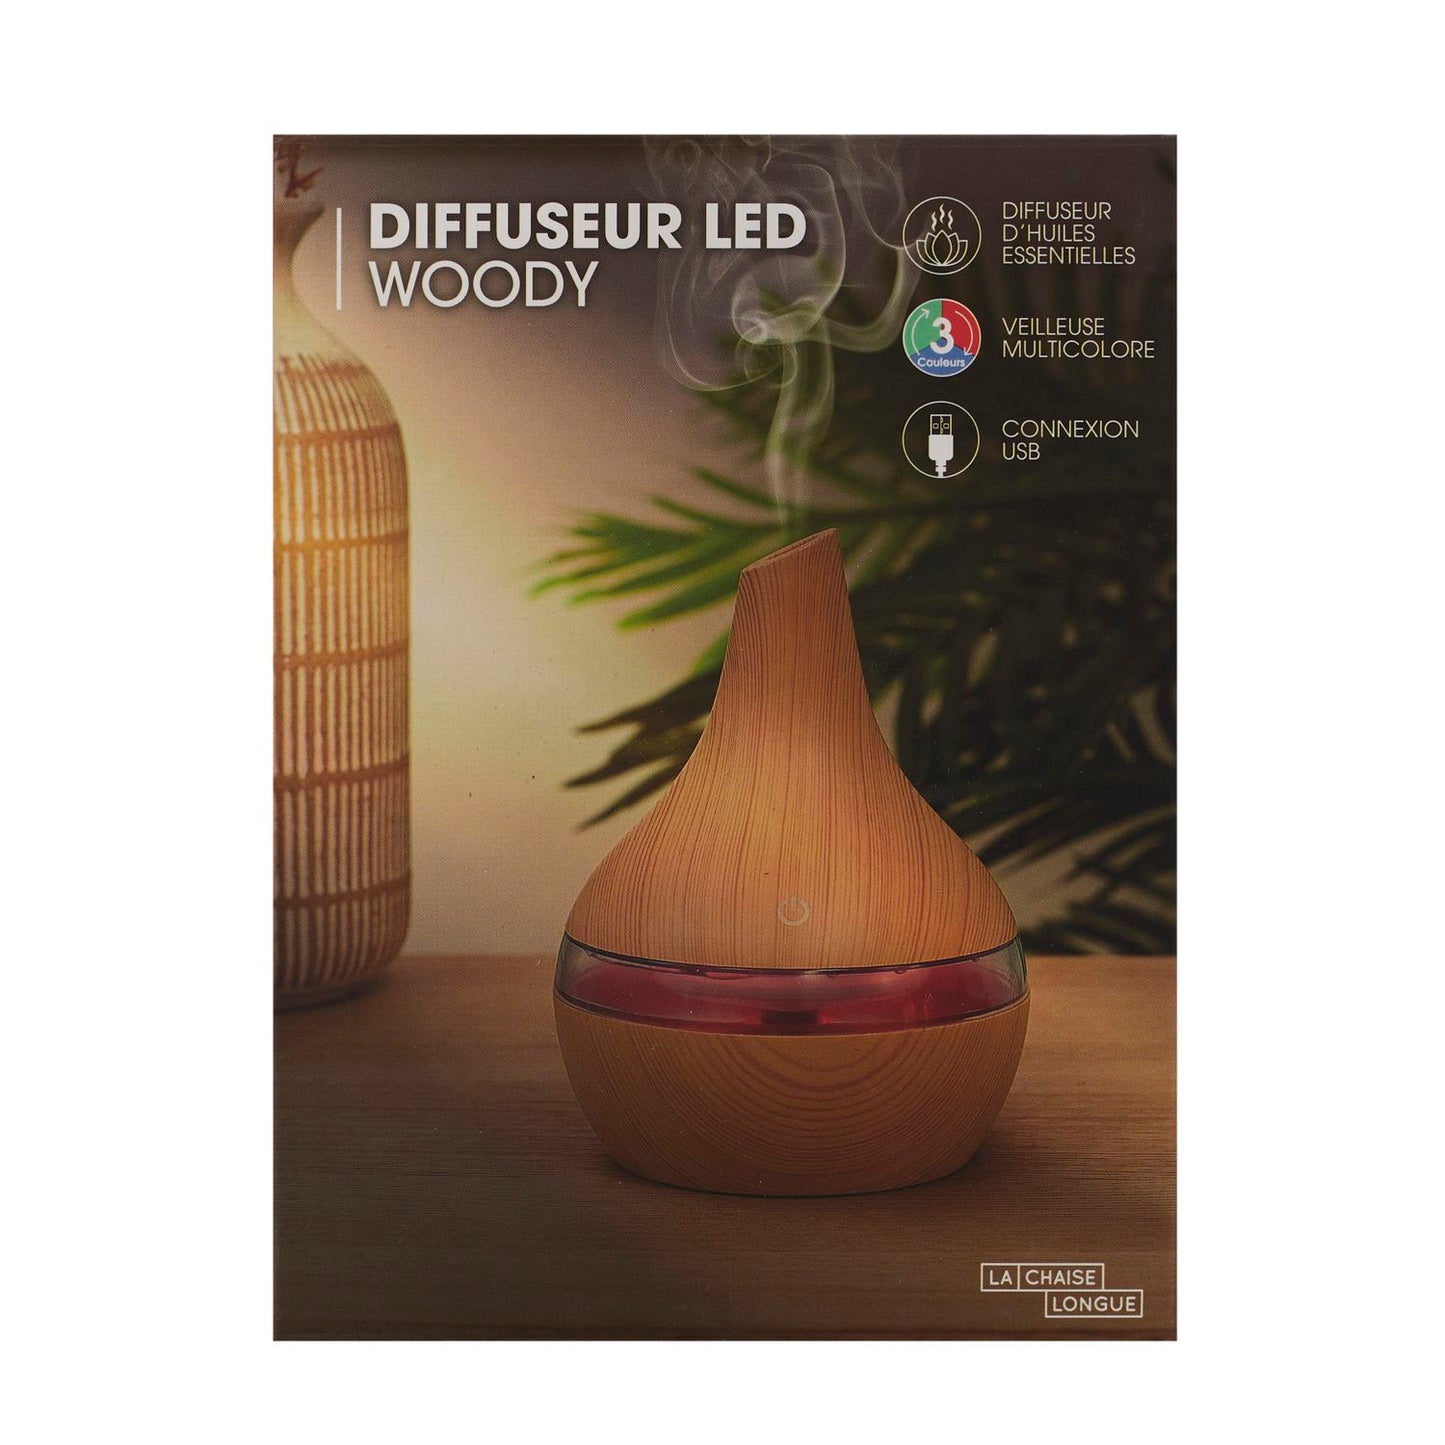 DIFFUSEUR LED WOODY